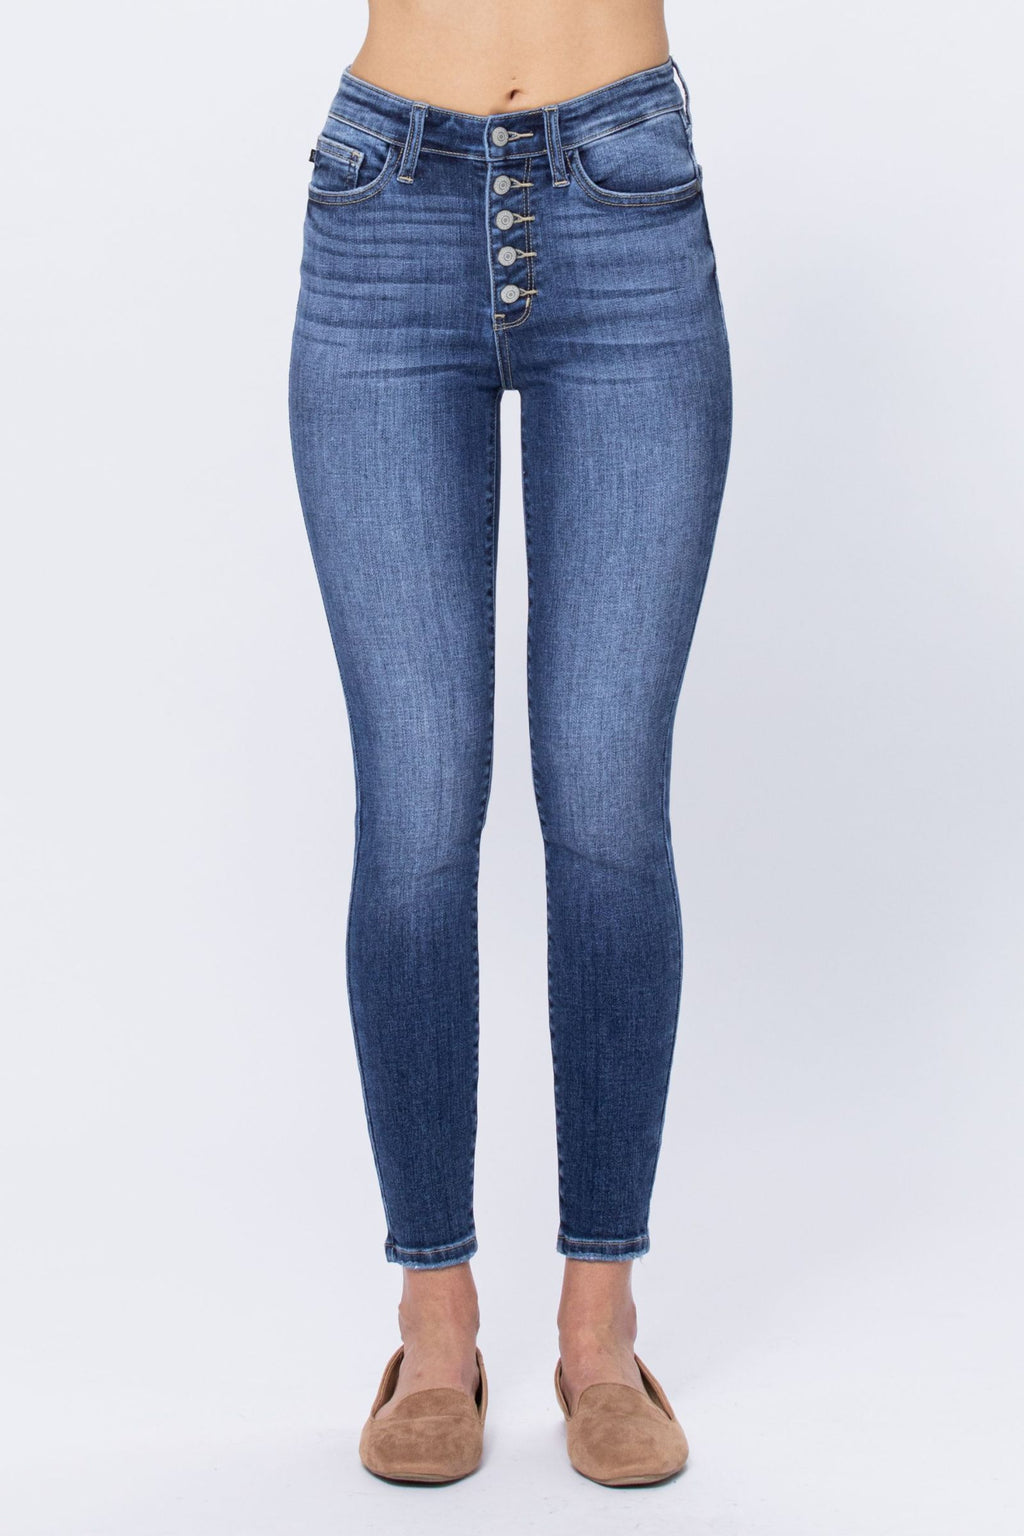 Jamie - Hi Rise Button Fly Skinny Judy Blue Jeans